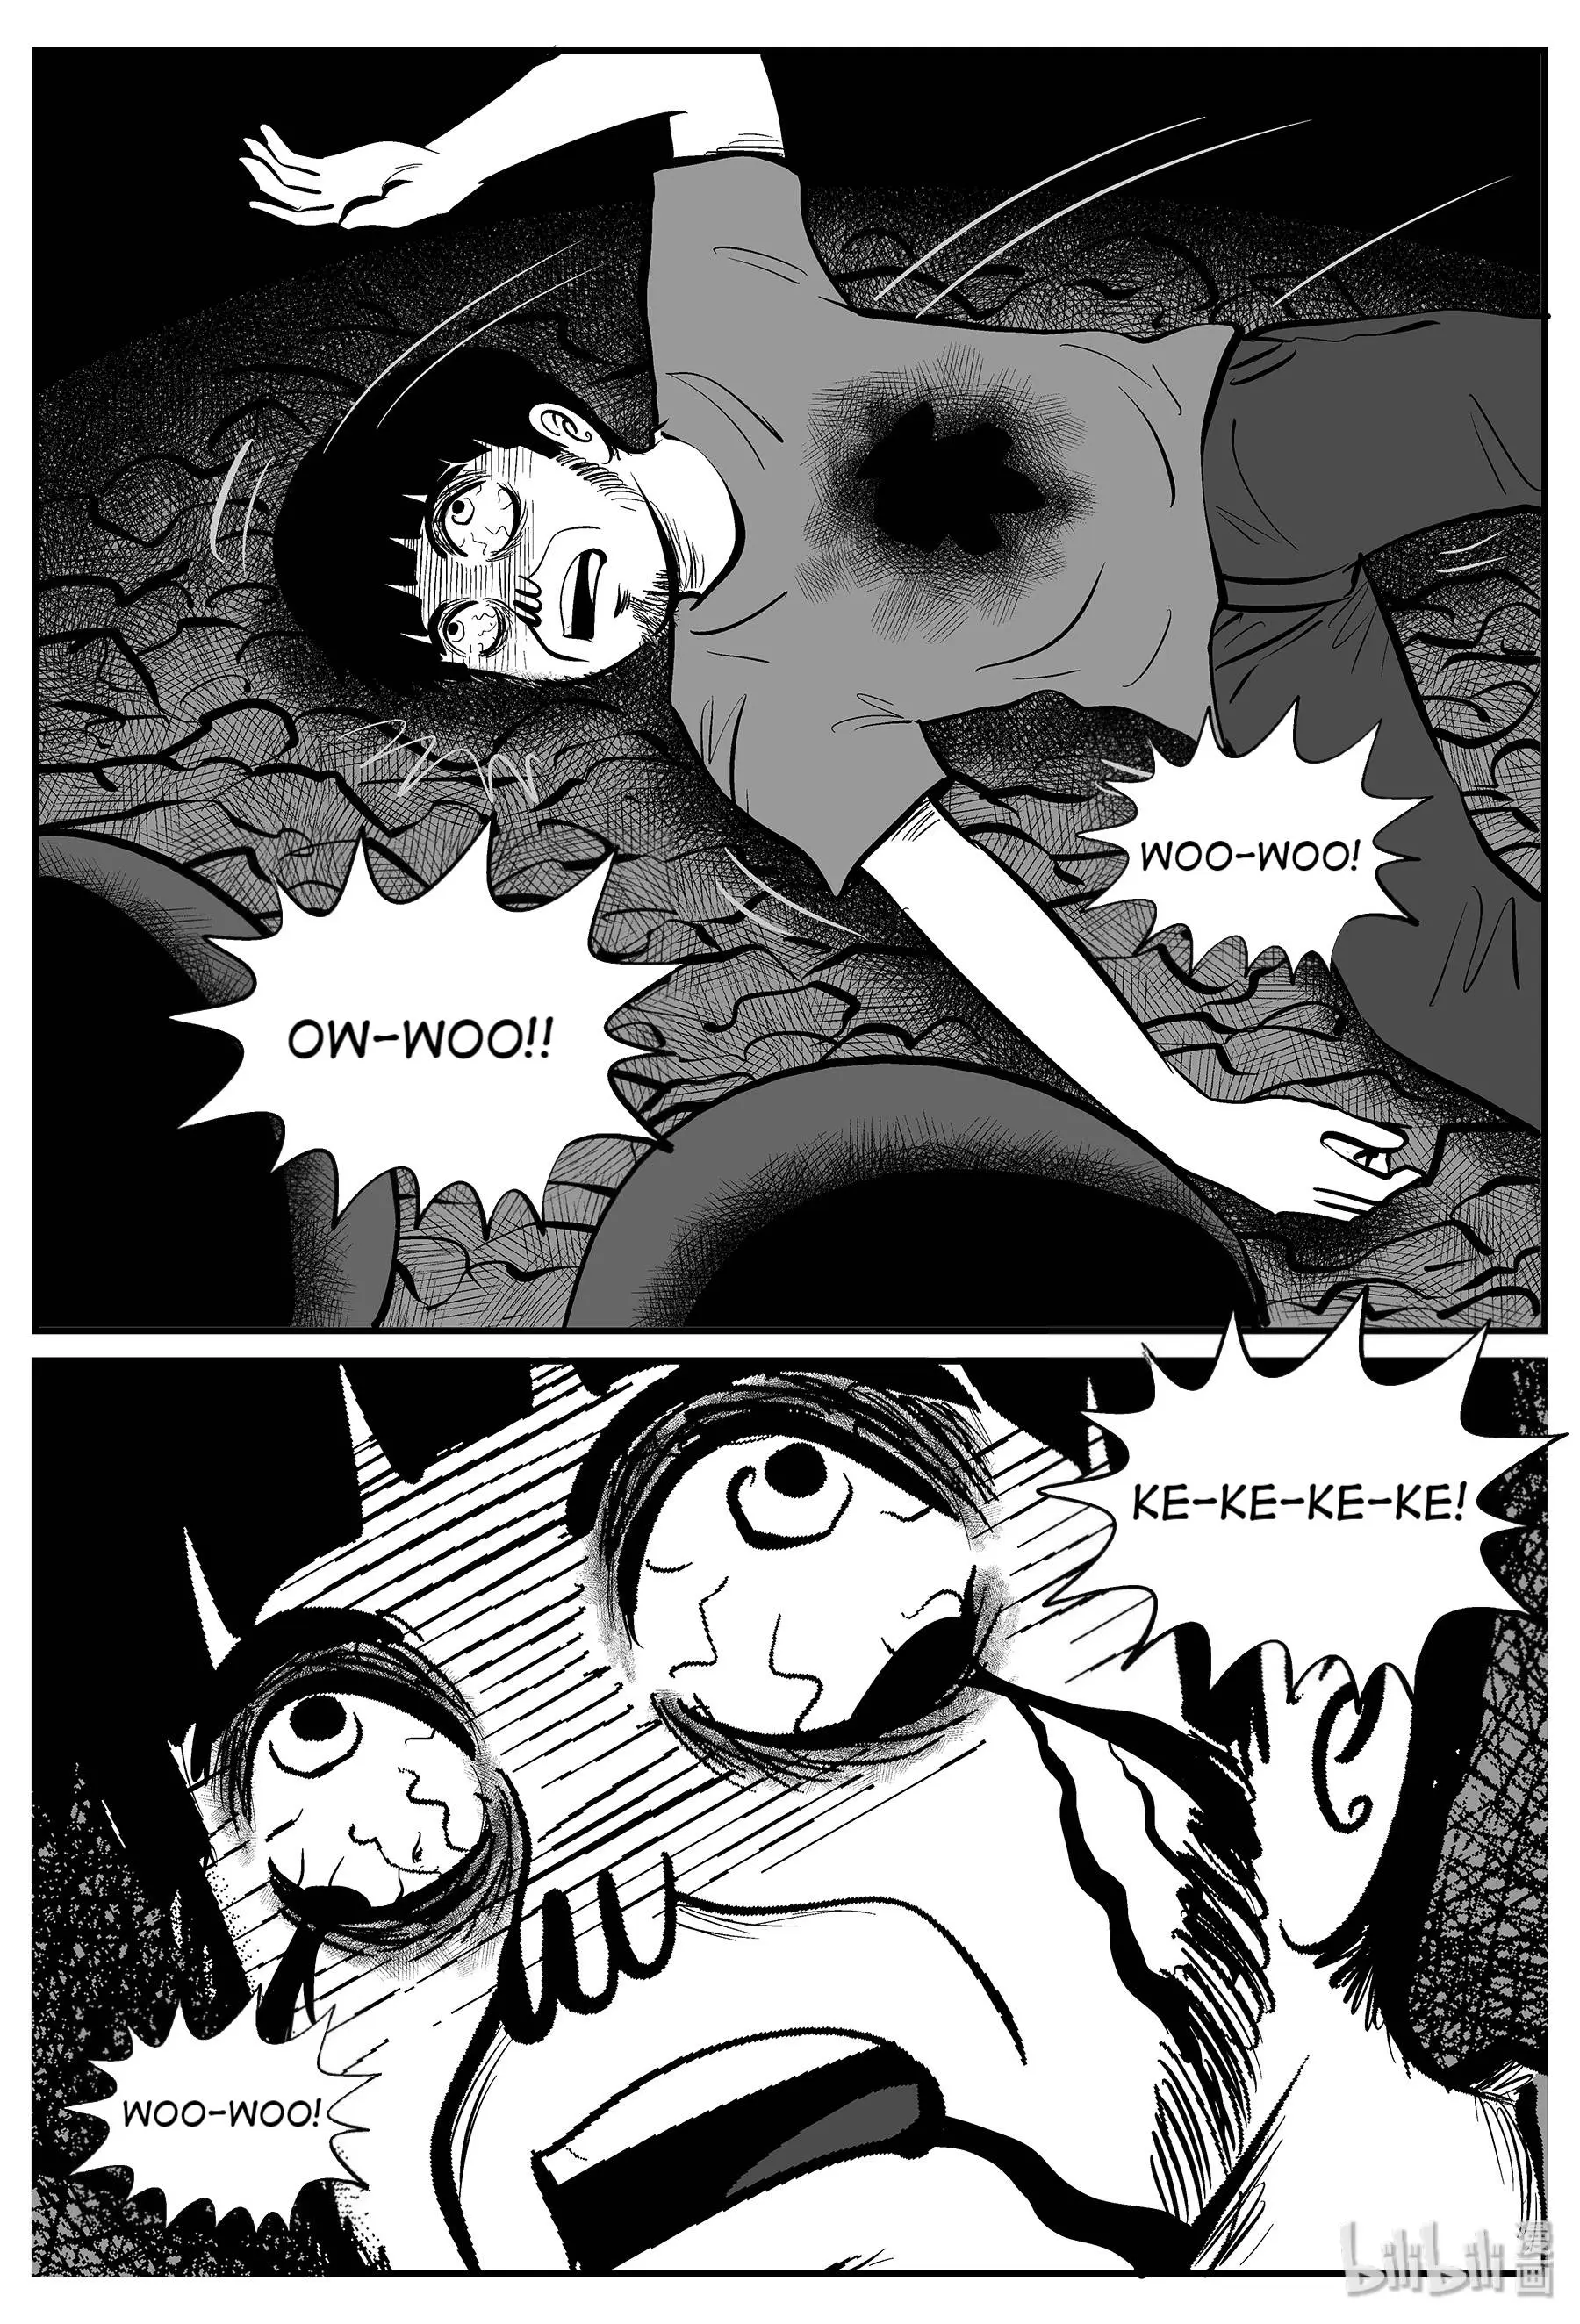 Strange Tales Of Xiao Zhi - 30 page 6-8ce5c7ab